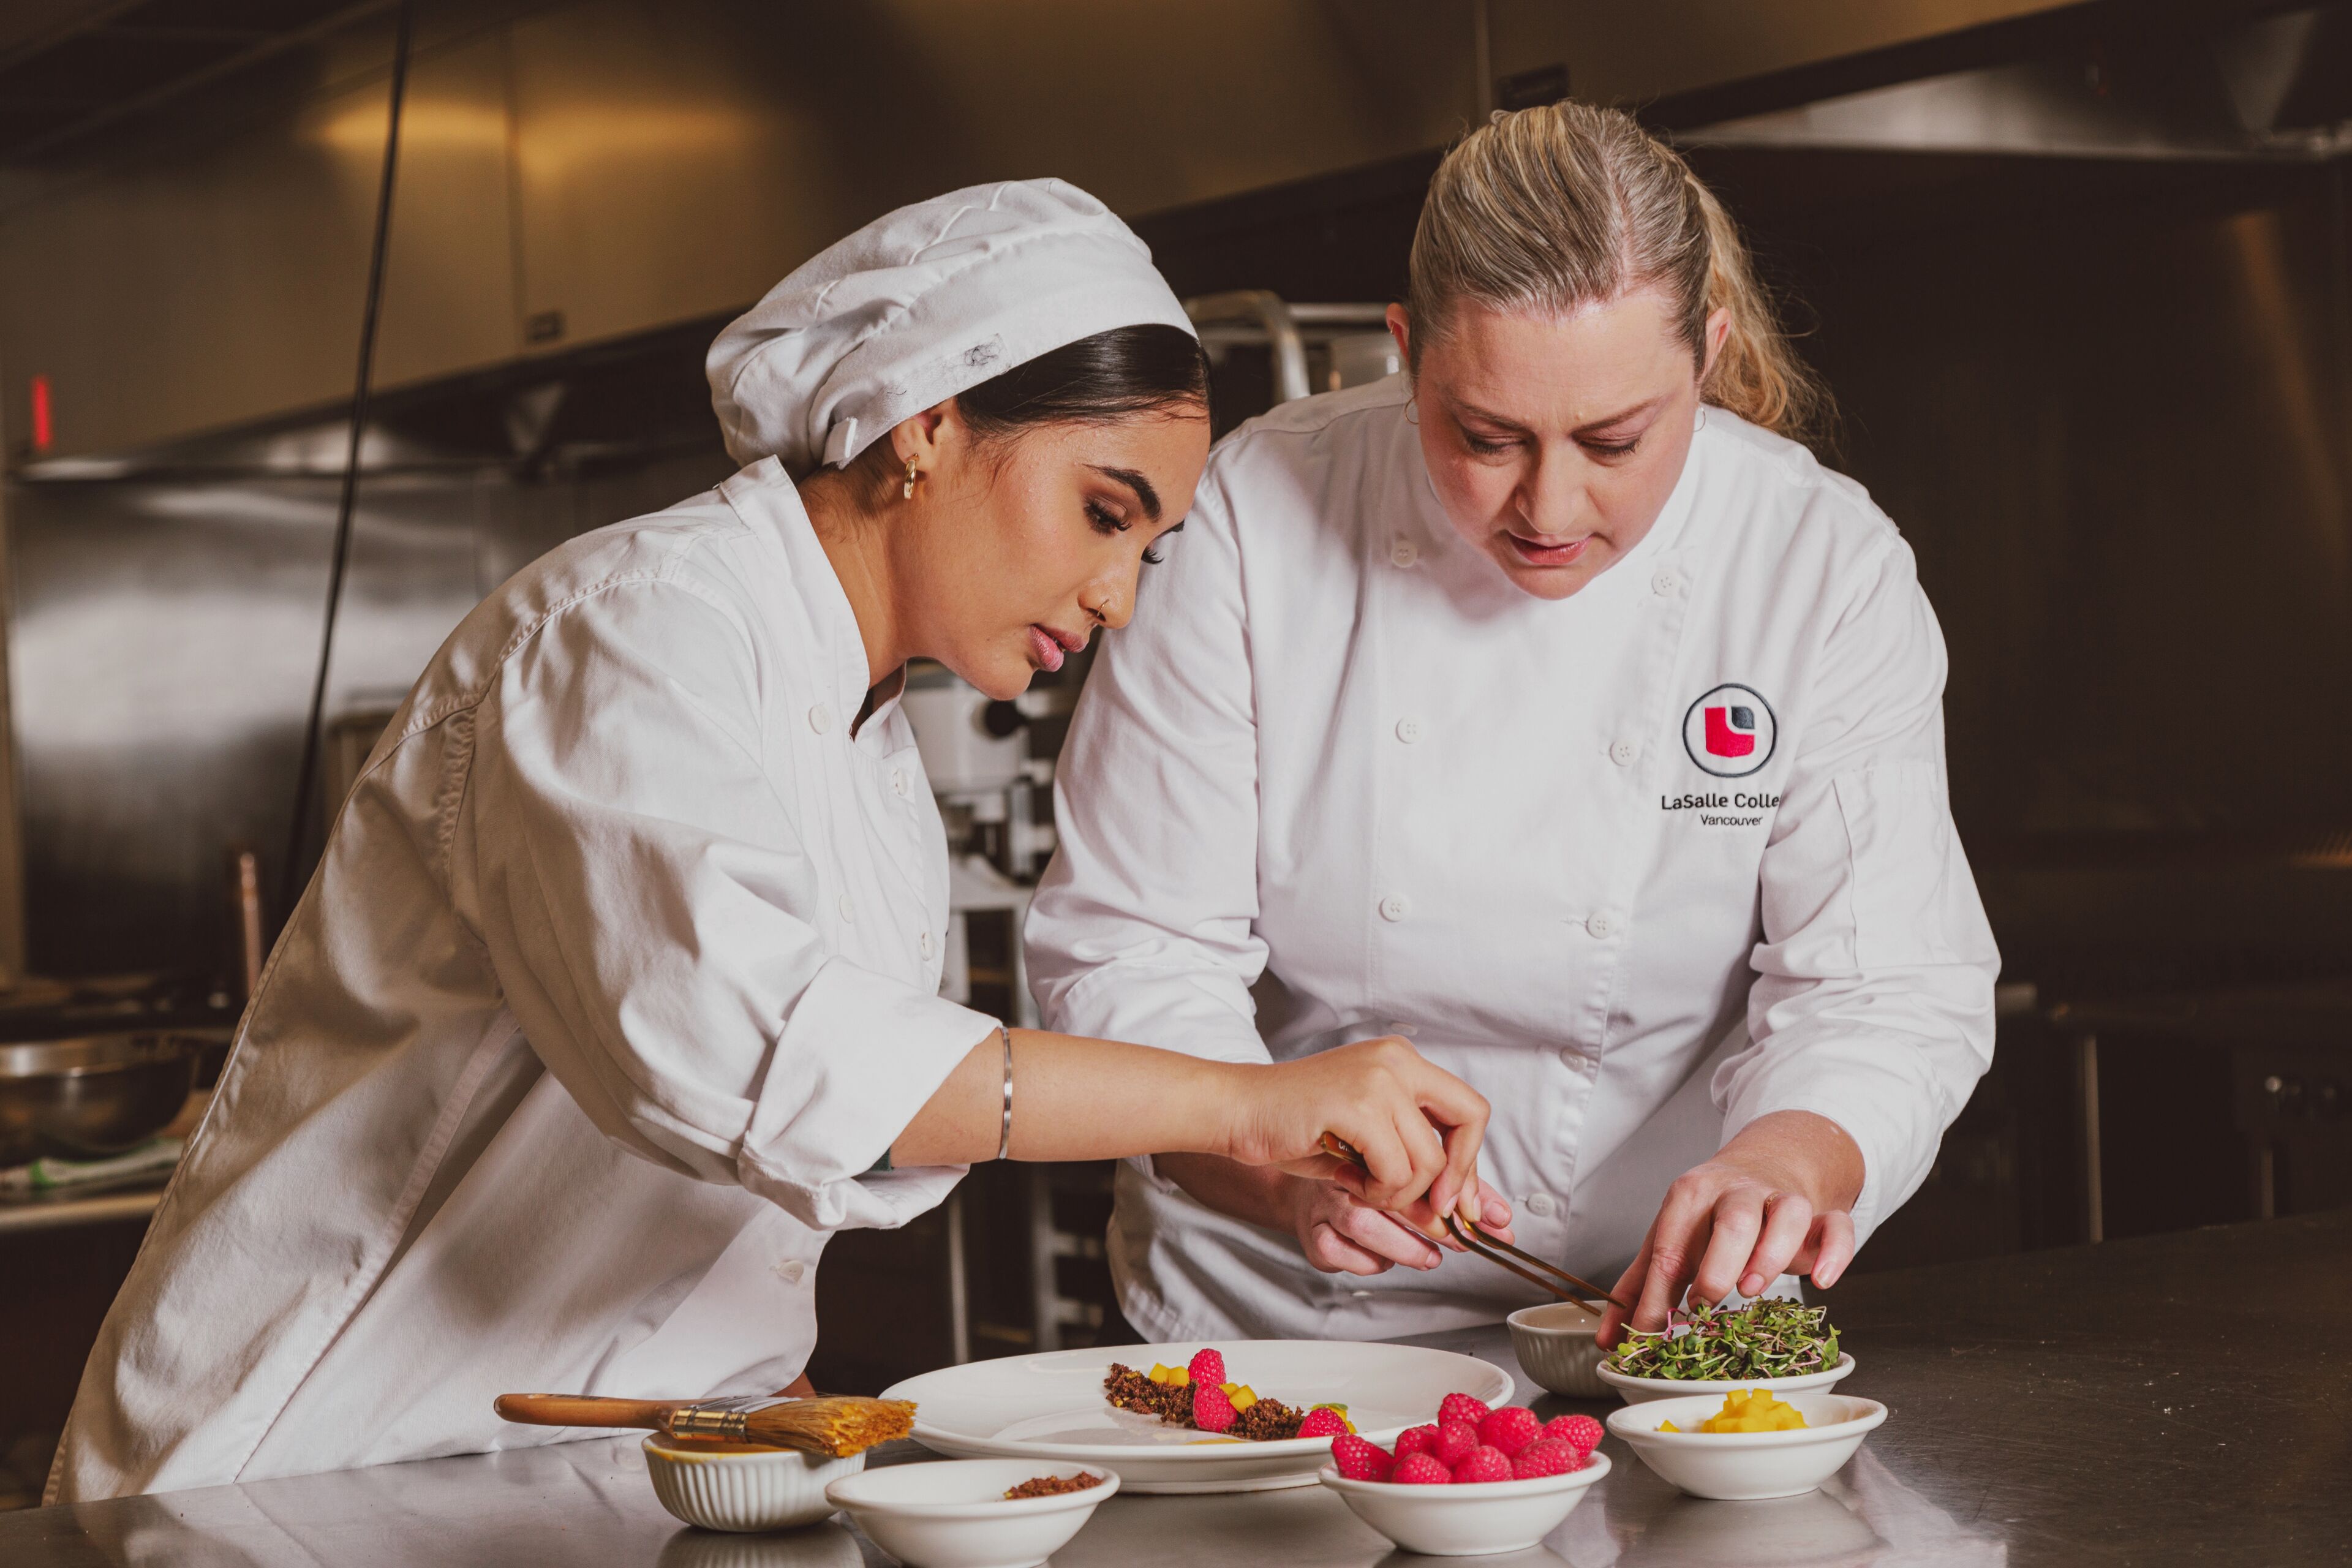 A seasoned chef guides a young cook in the art of plating, combining expertise with fresh talent.